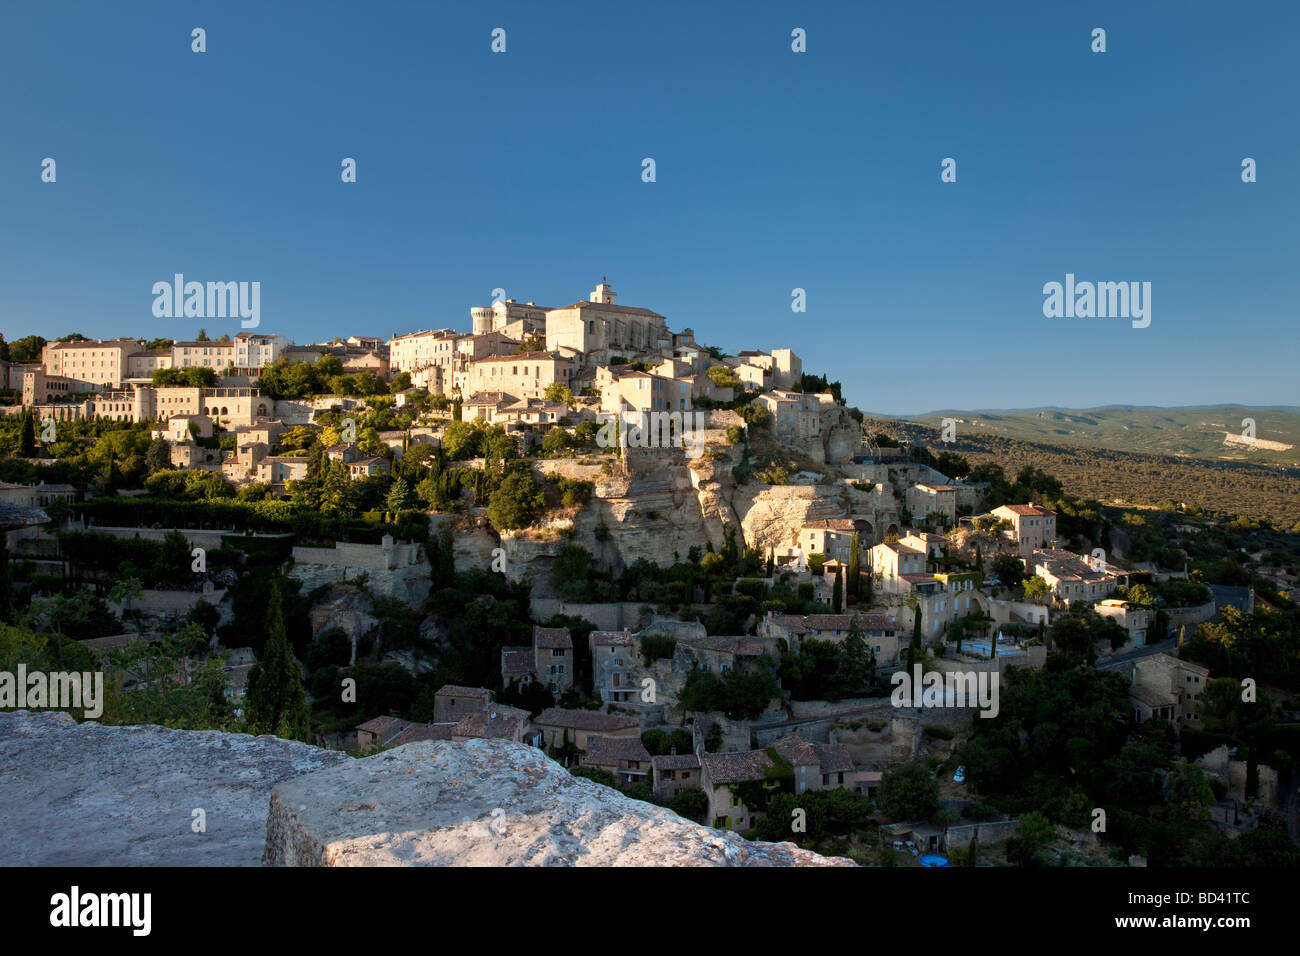 Hilltop town of Gordes, Provence France Stock Photo